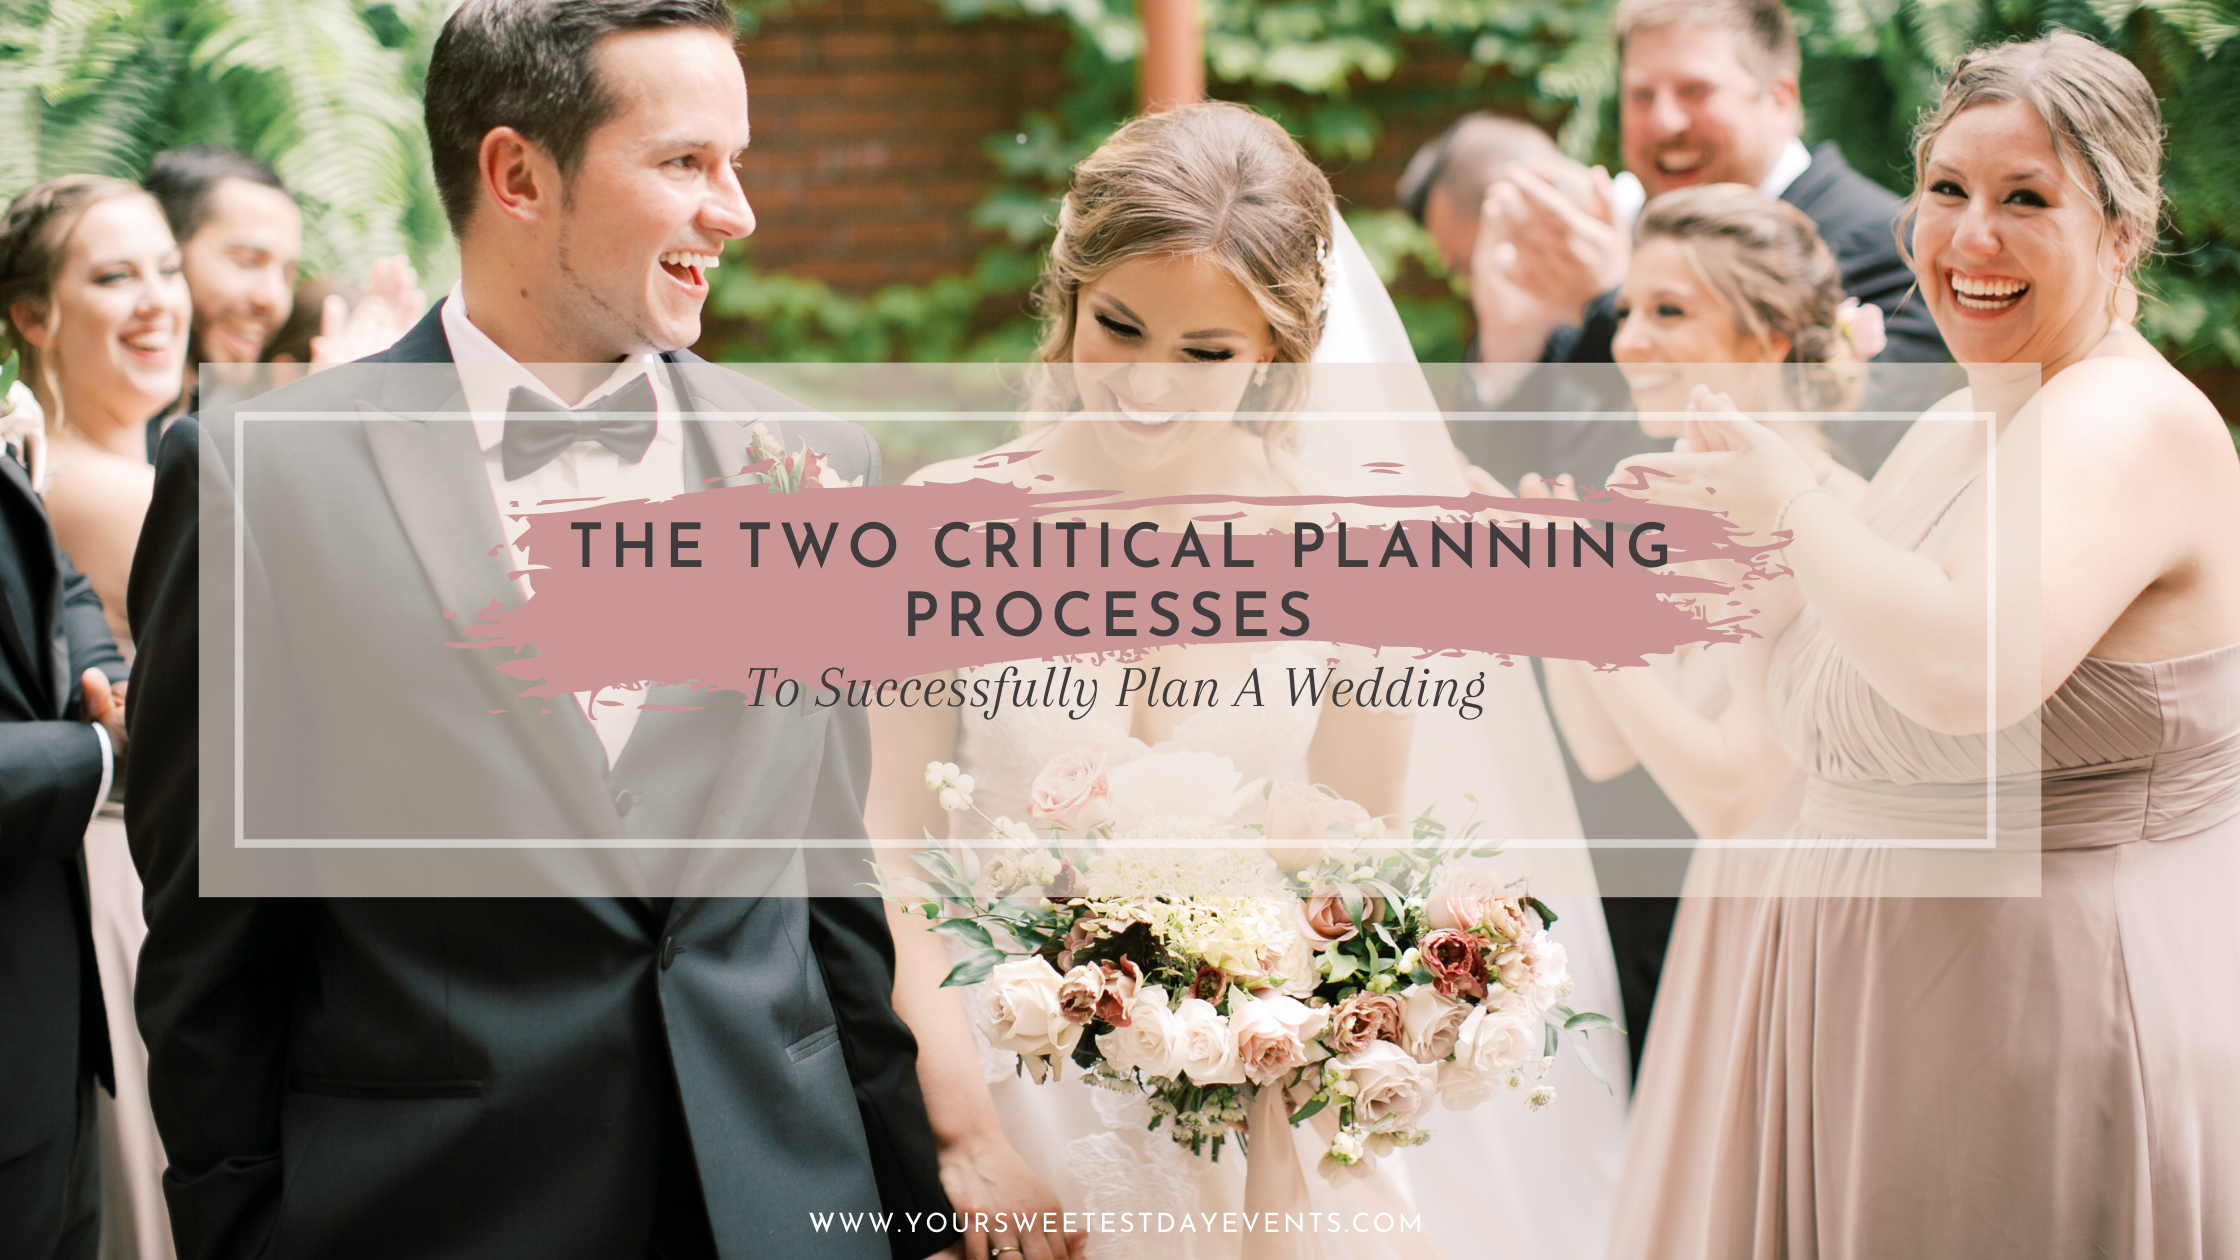 The Two Critical Planning Processes